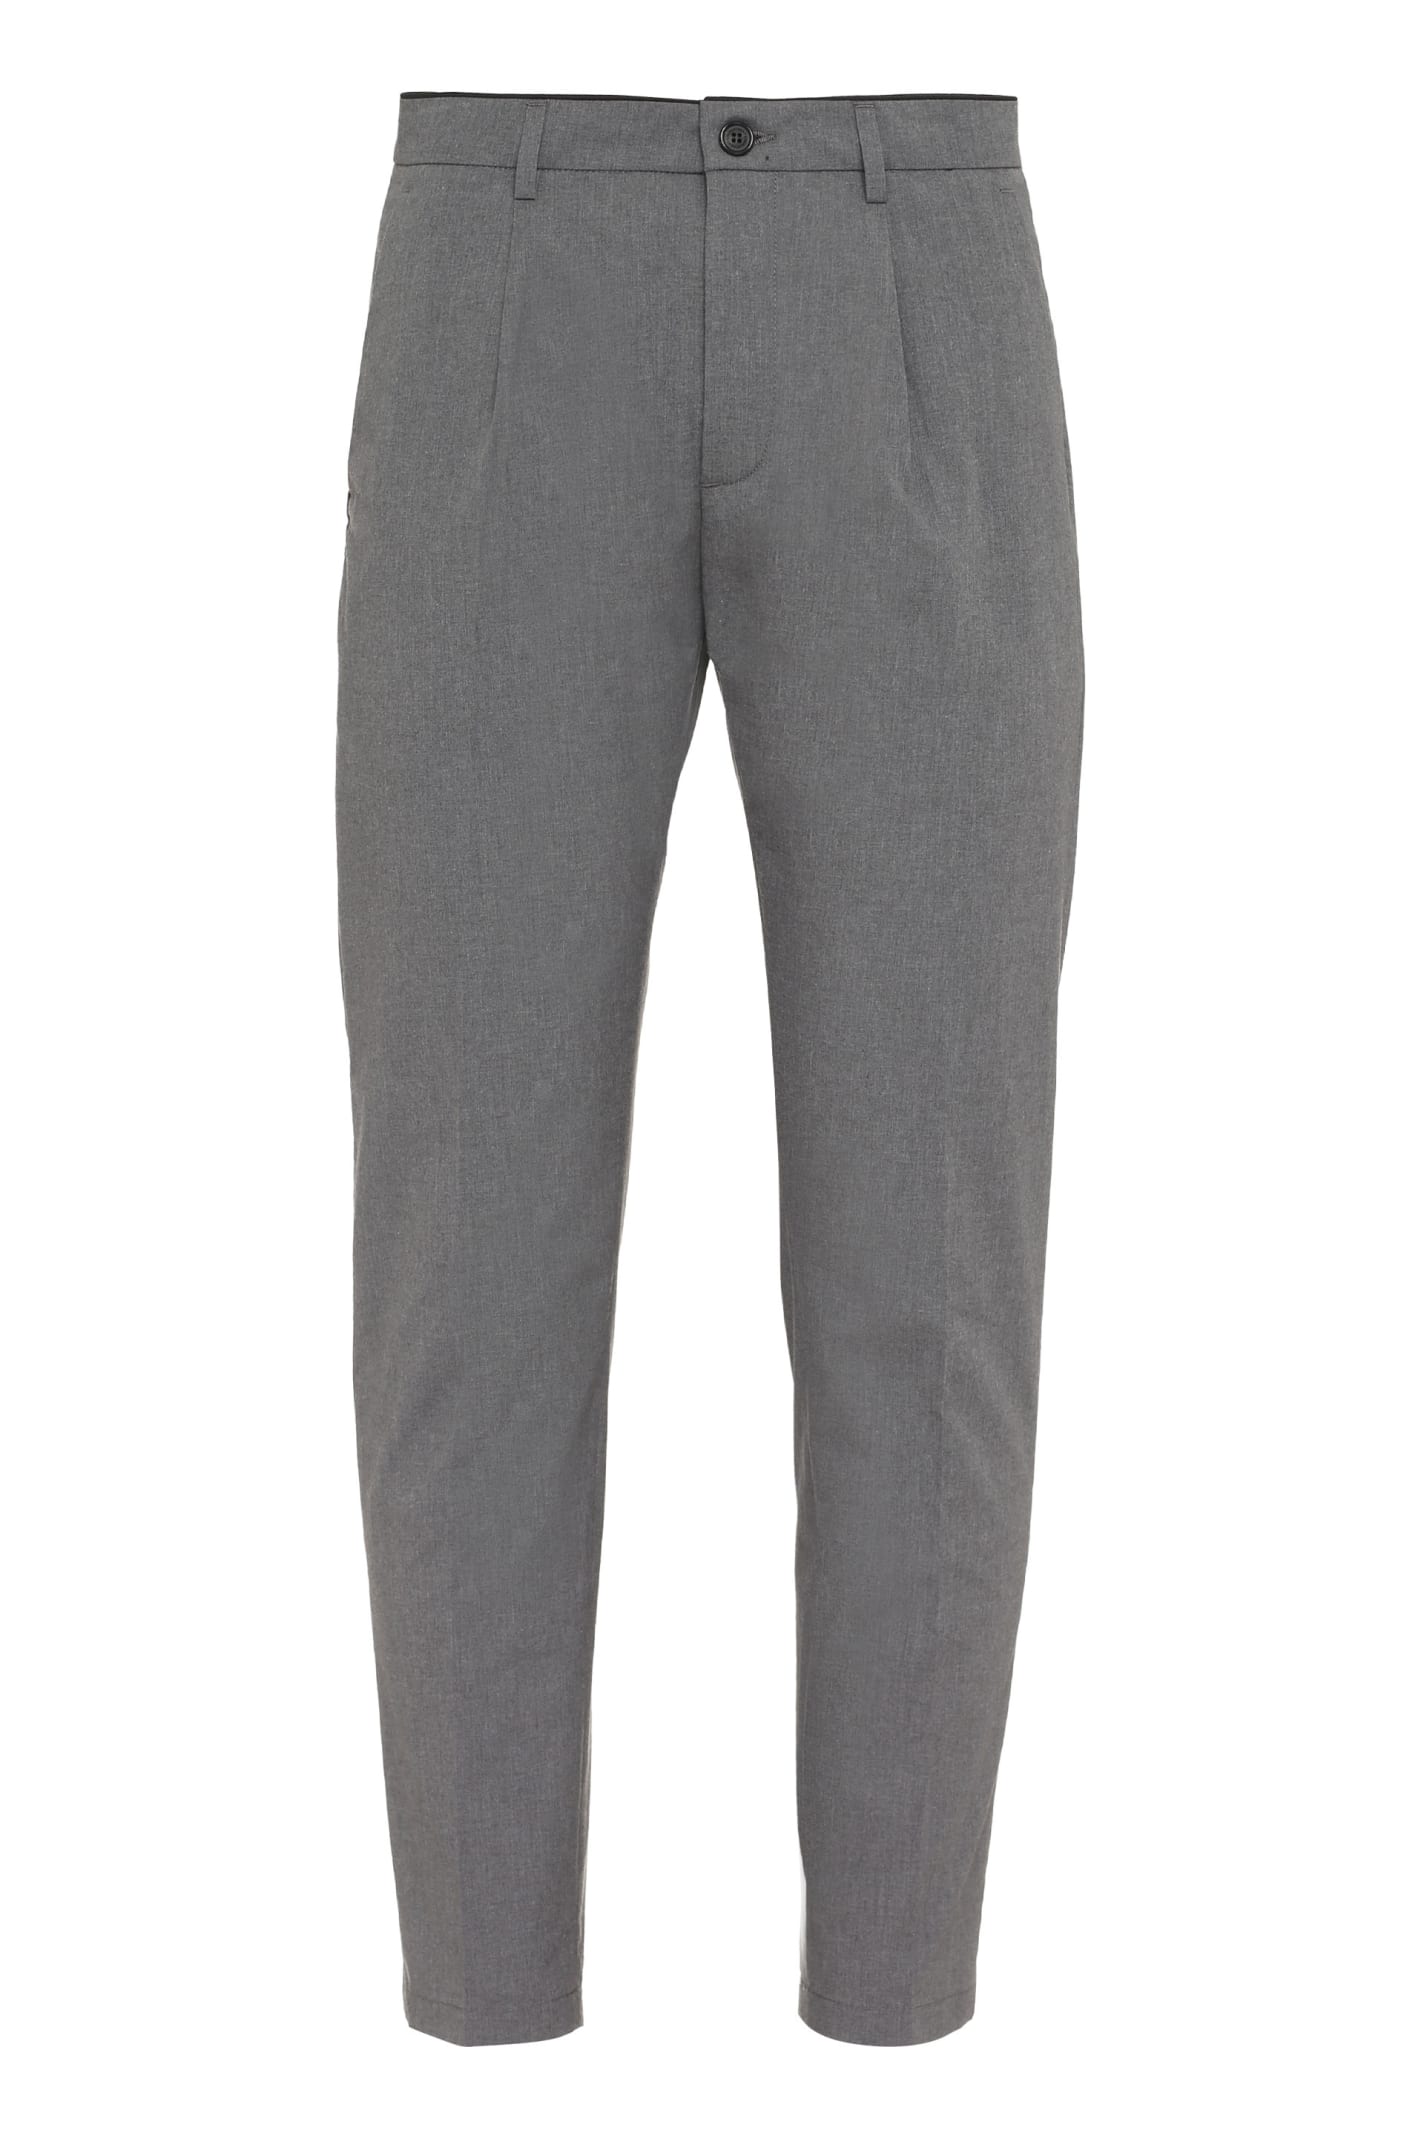 Department Five Prince Cotton Trousers